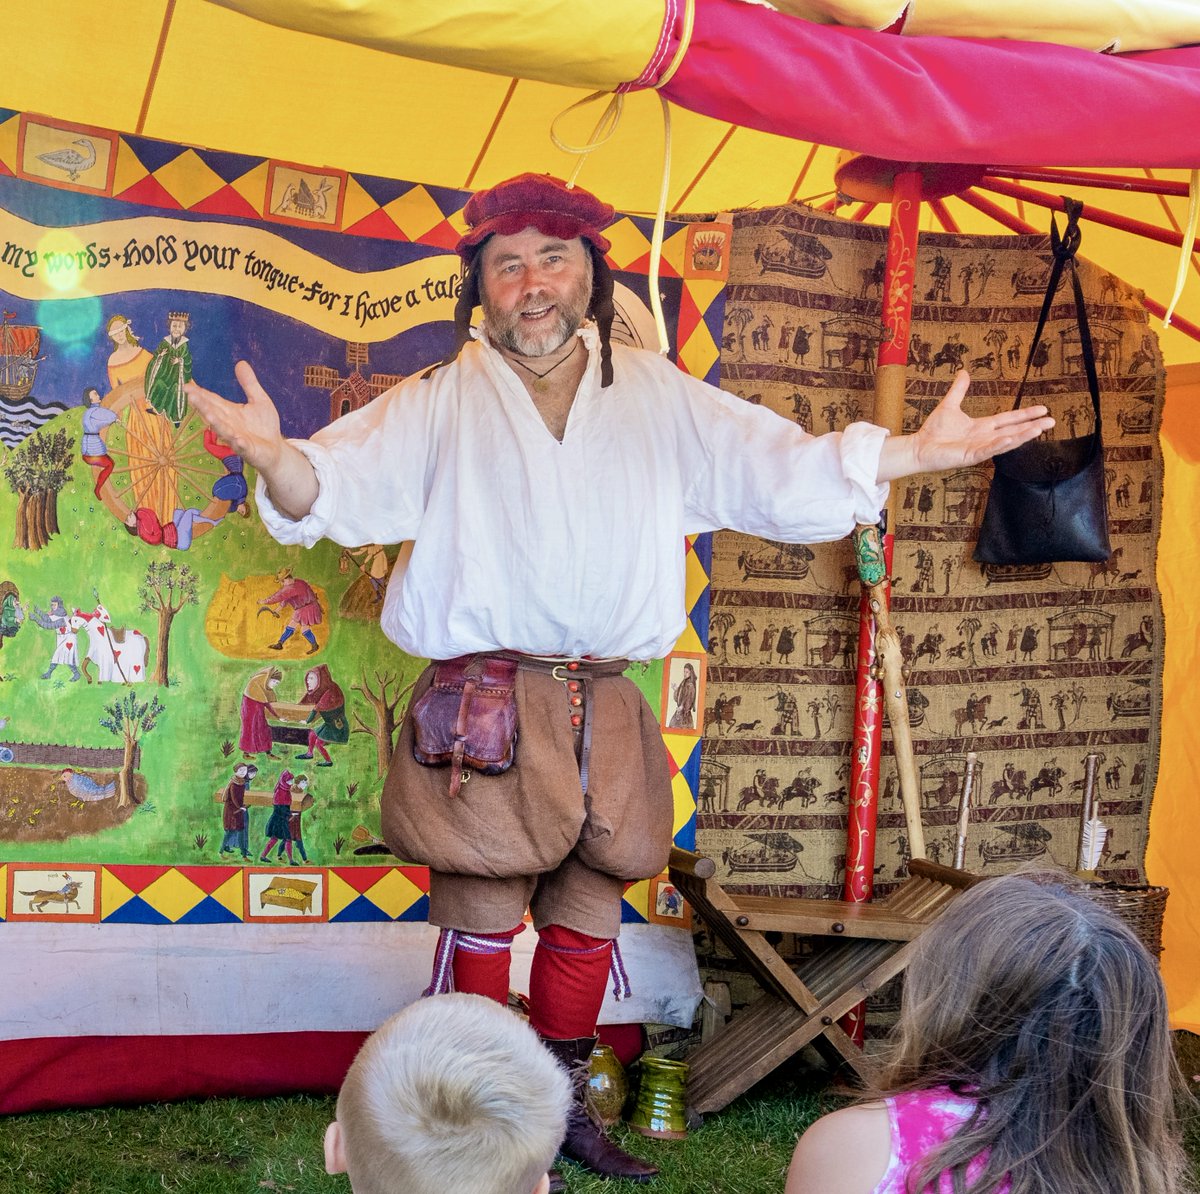 Gather round for a telling of tall Tudor tales & foul fabrications in a manner most uncommon for these times, but once enjoyed by all goodwives and honest jacks. #ElizabethanFayre 📅 Saturday 8 June ⏰ 11am – 5pm Take a look at what's on orlo.uk/8d41m @theyarnsmith